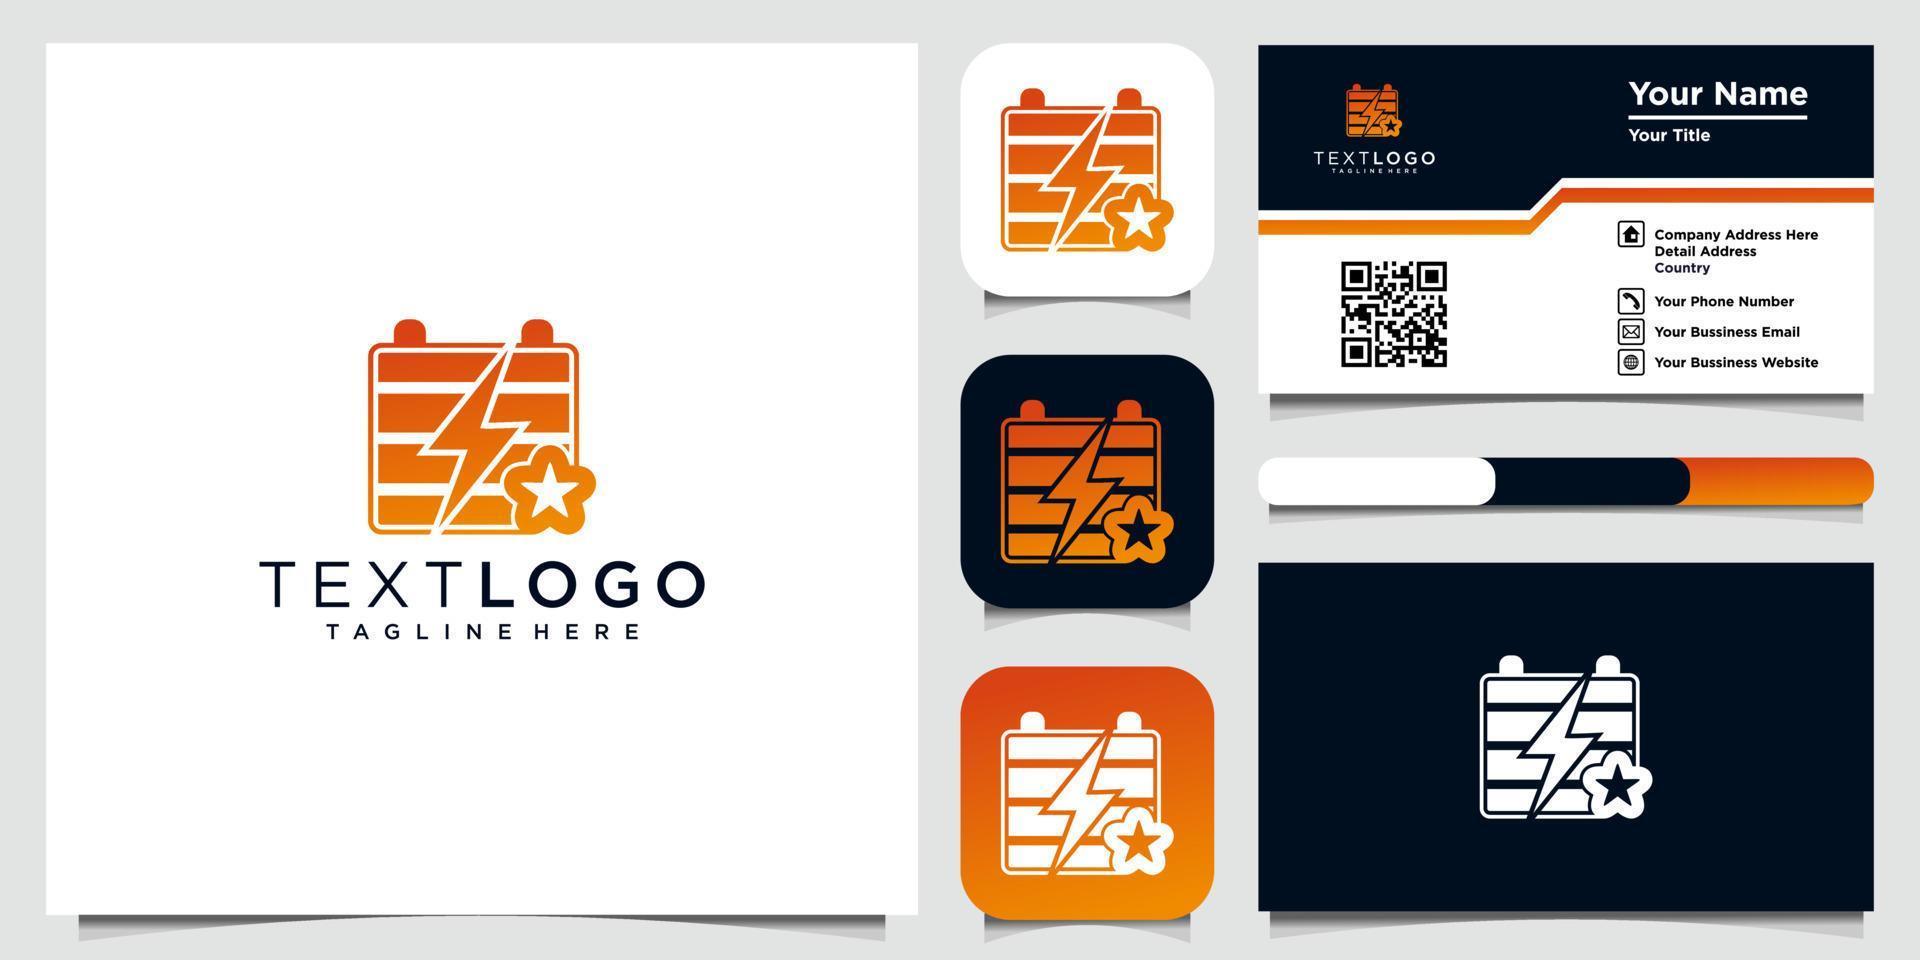 Electric logo design. It is suitable for companies in the fields of electricity, electric service, electric cars. vector